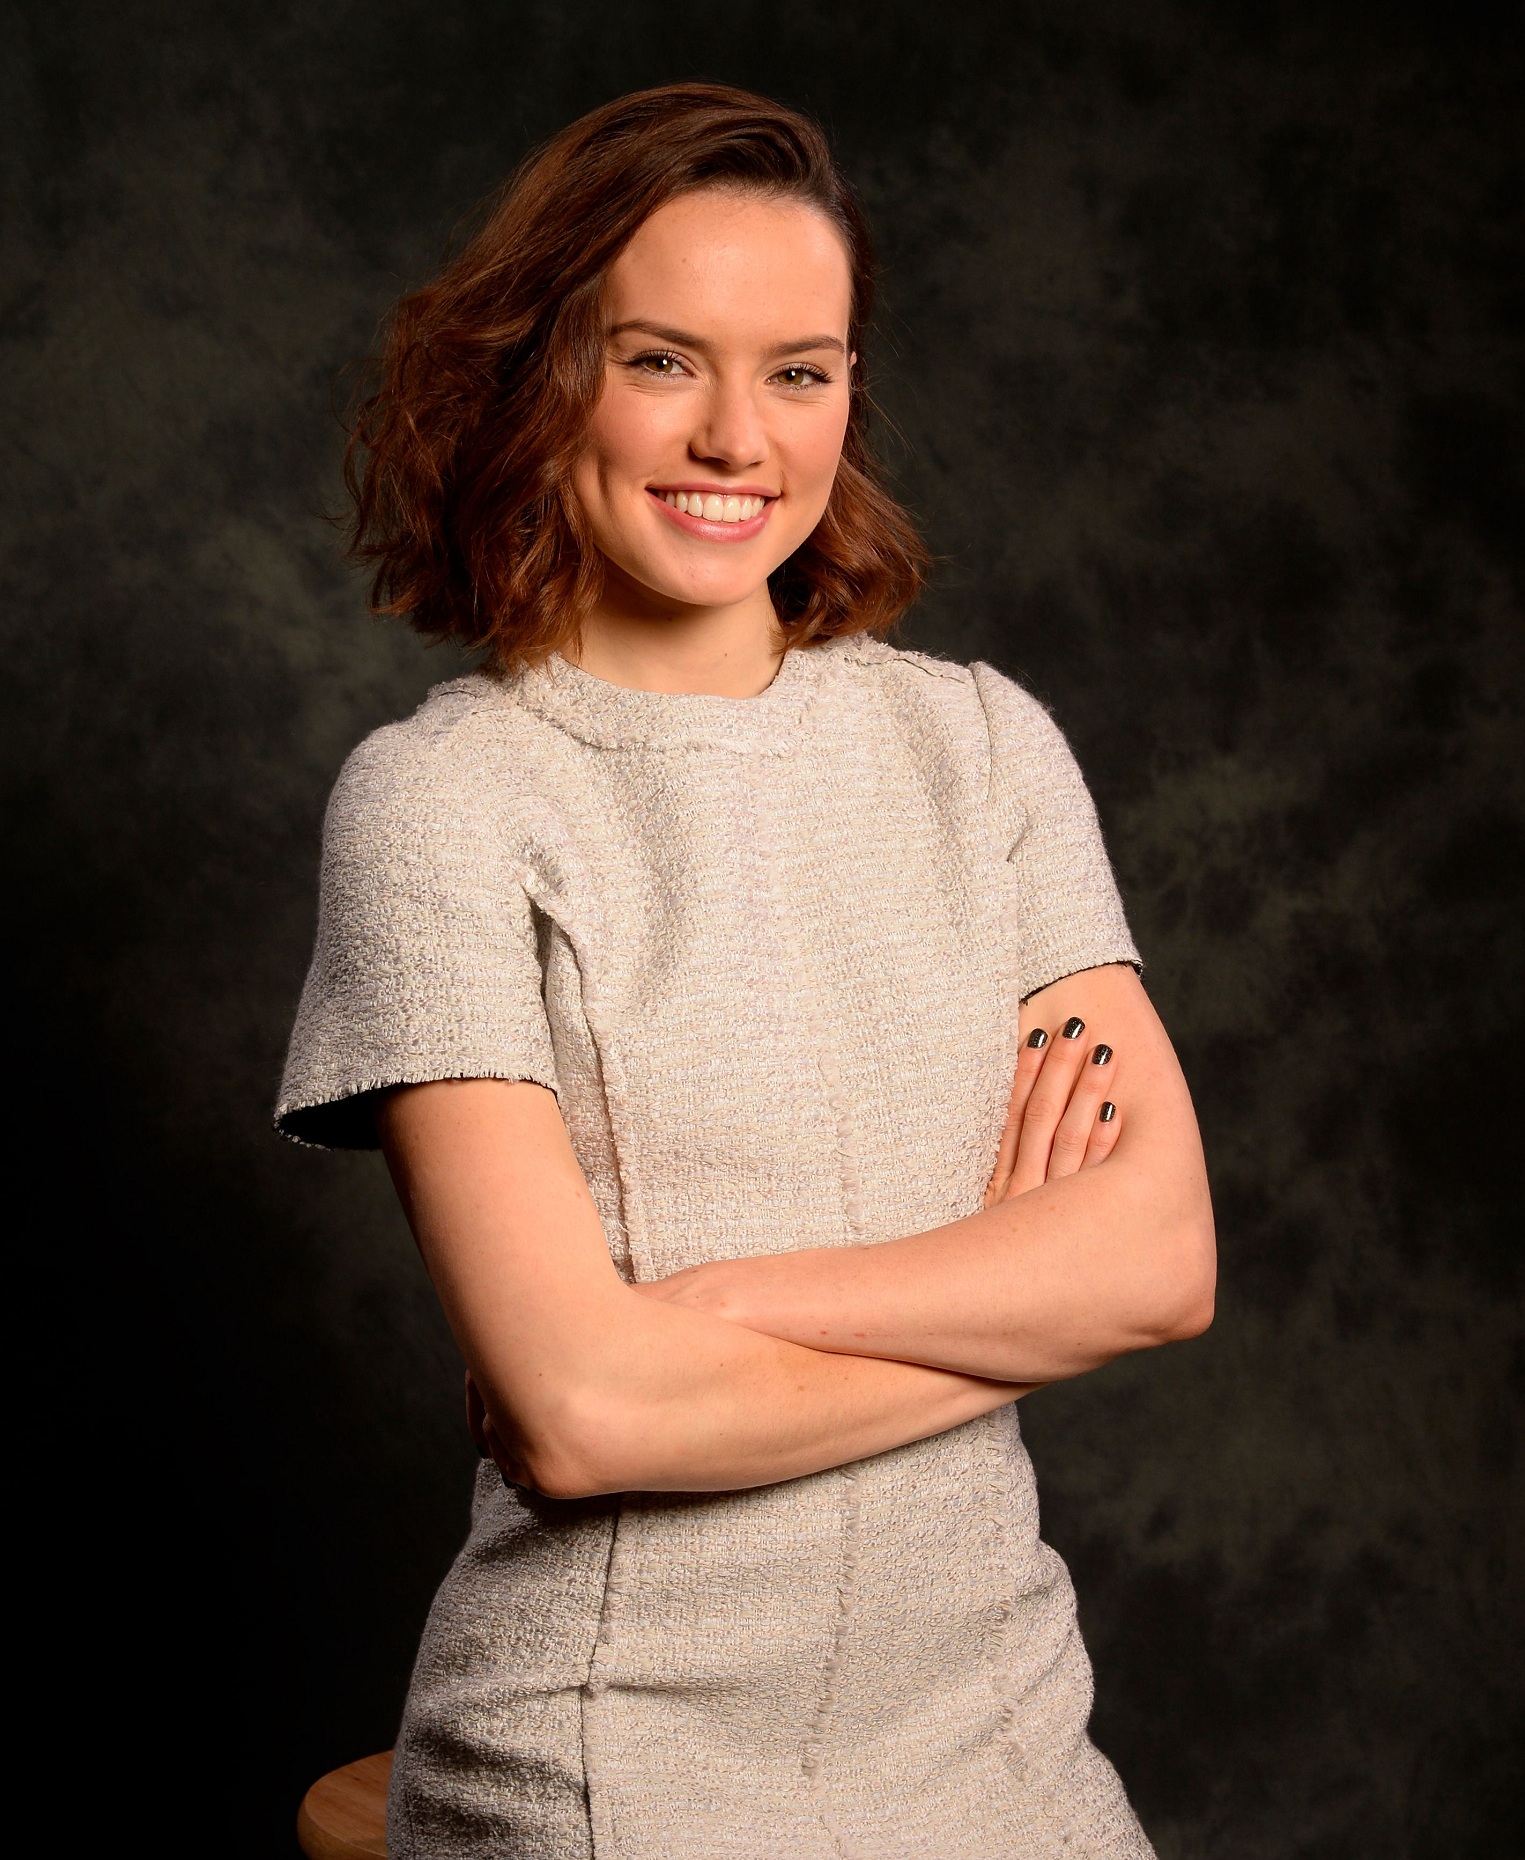 Daisy Ridley Smiling In Green Dress Wallpapers